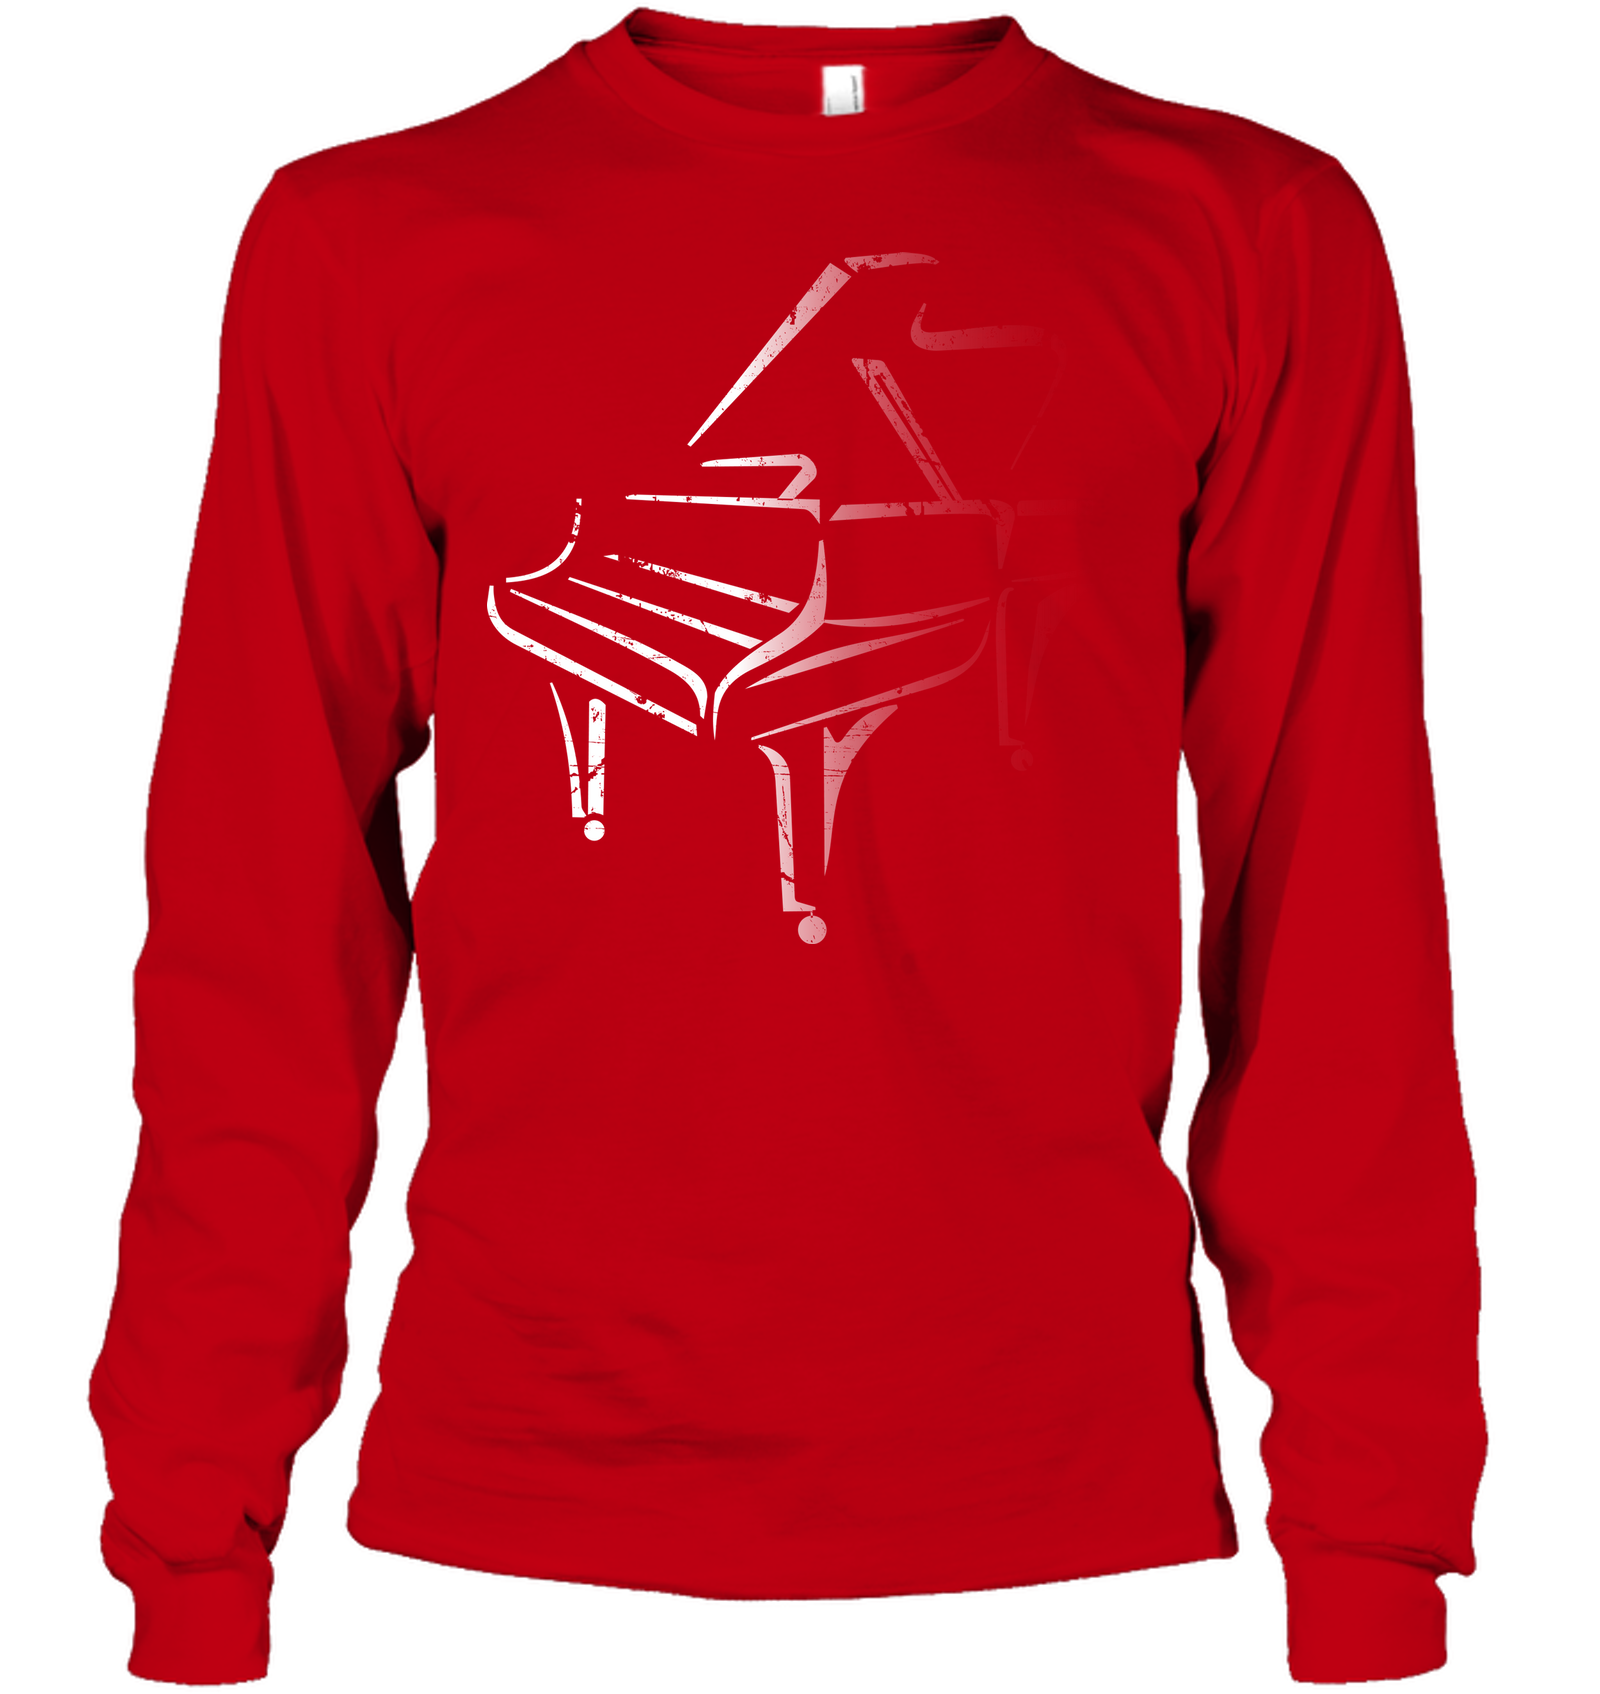 White Piano in the Shadows - Gildan Adult Classic Long Sleeve T-Shirt